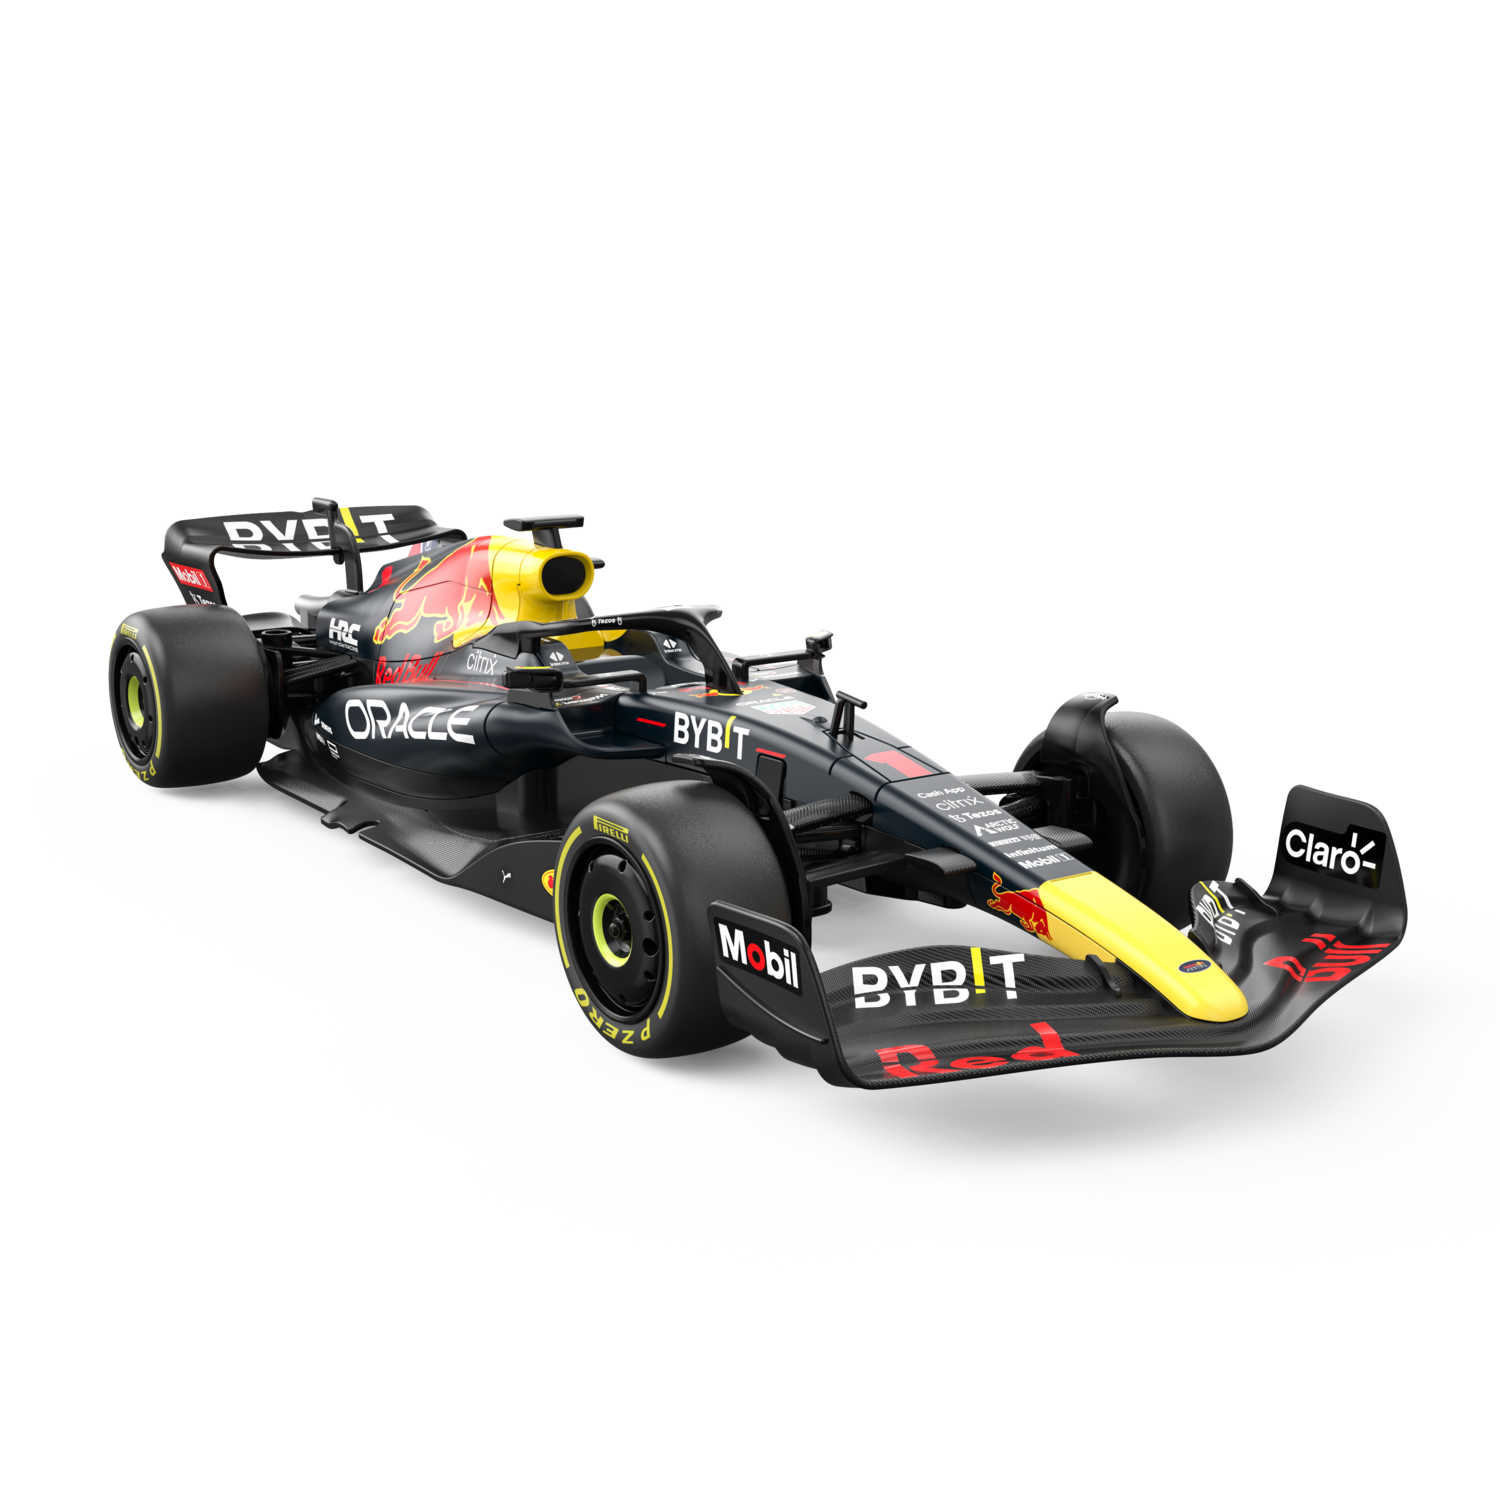 Pirox Toys Rc 1:18 Oracle Red Bull Racing